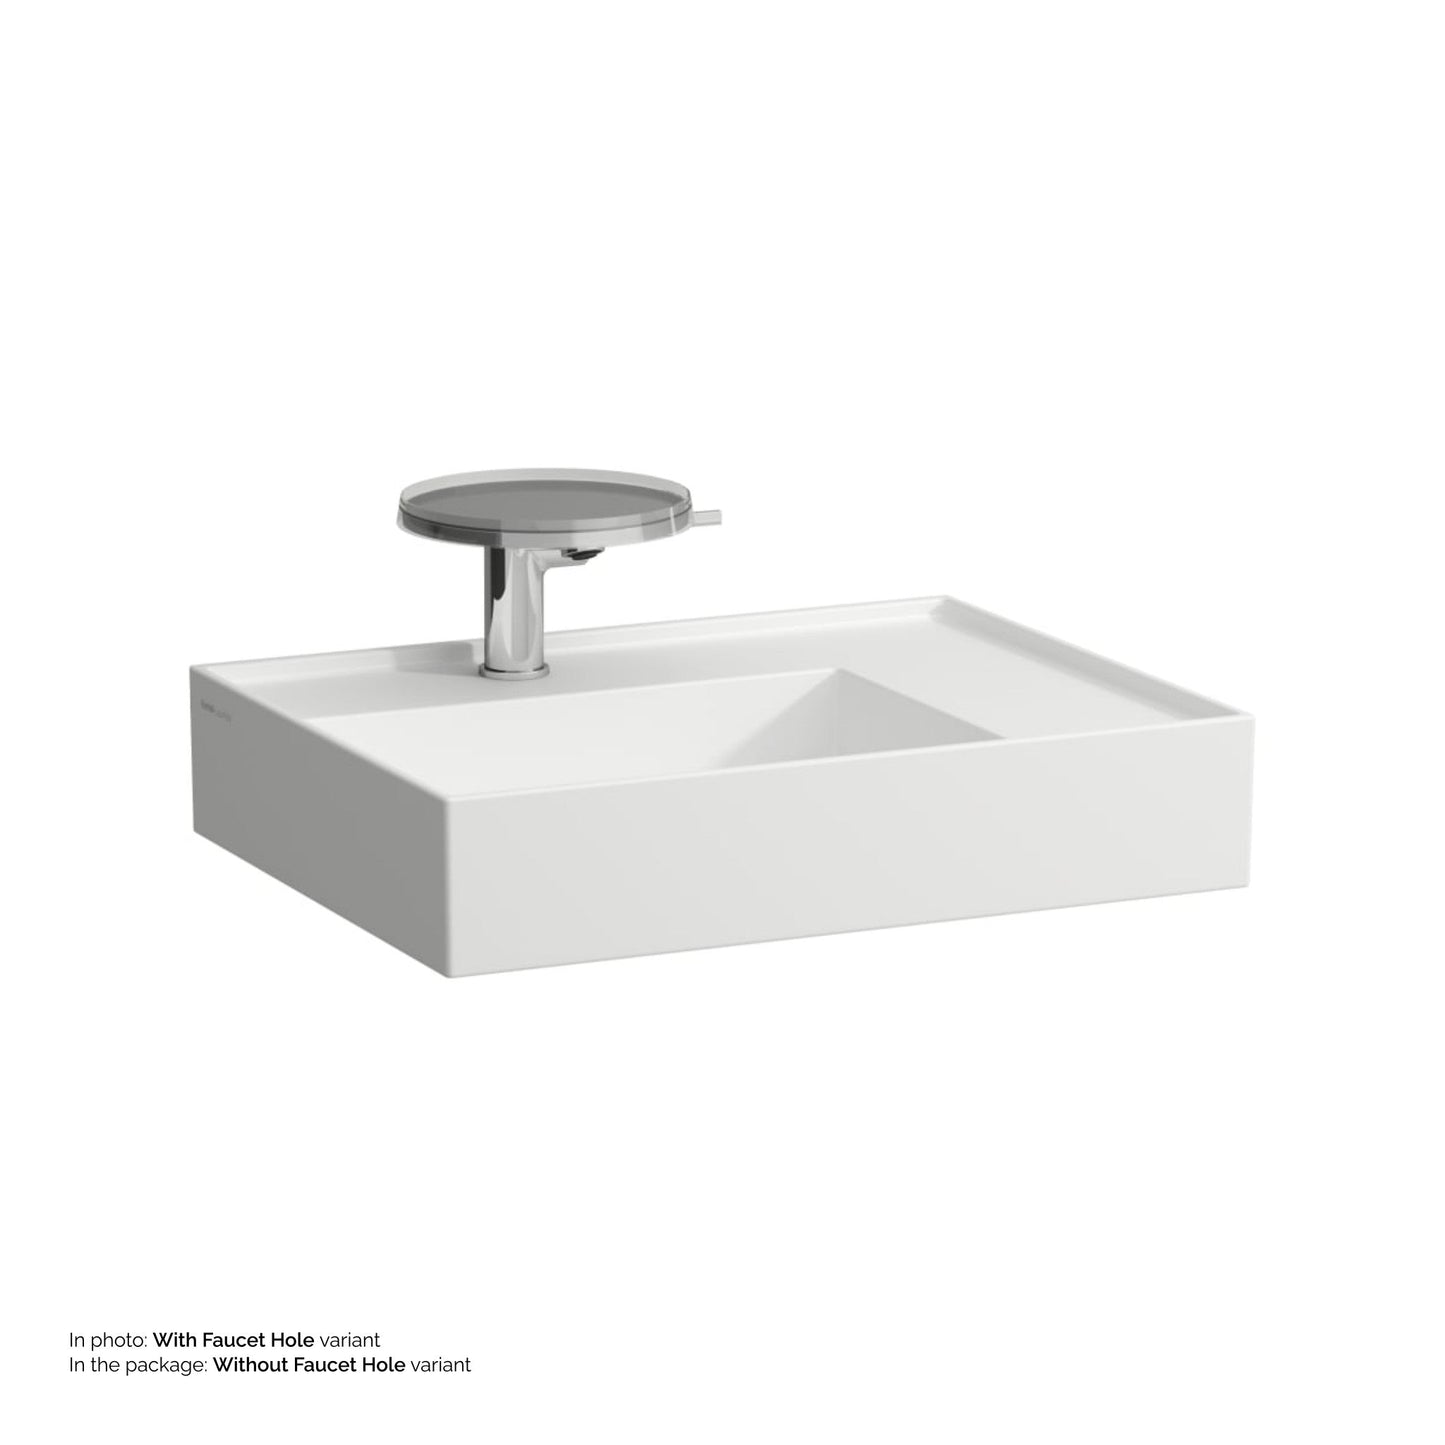 Laufen Kartell 24" x 18" Matte White Countertop Shelf-Right Bathroom Sink Without Faucet Hole